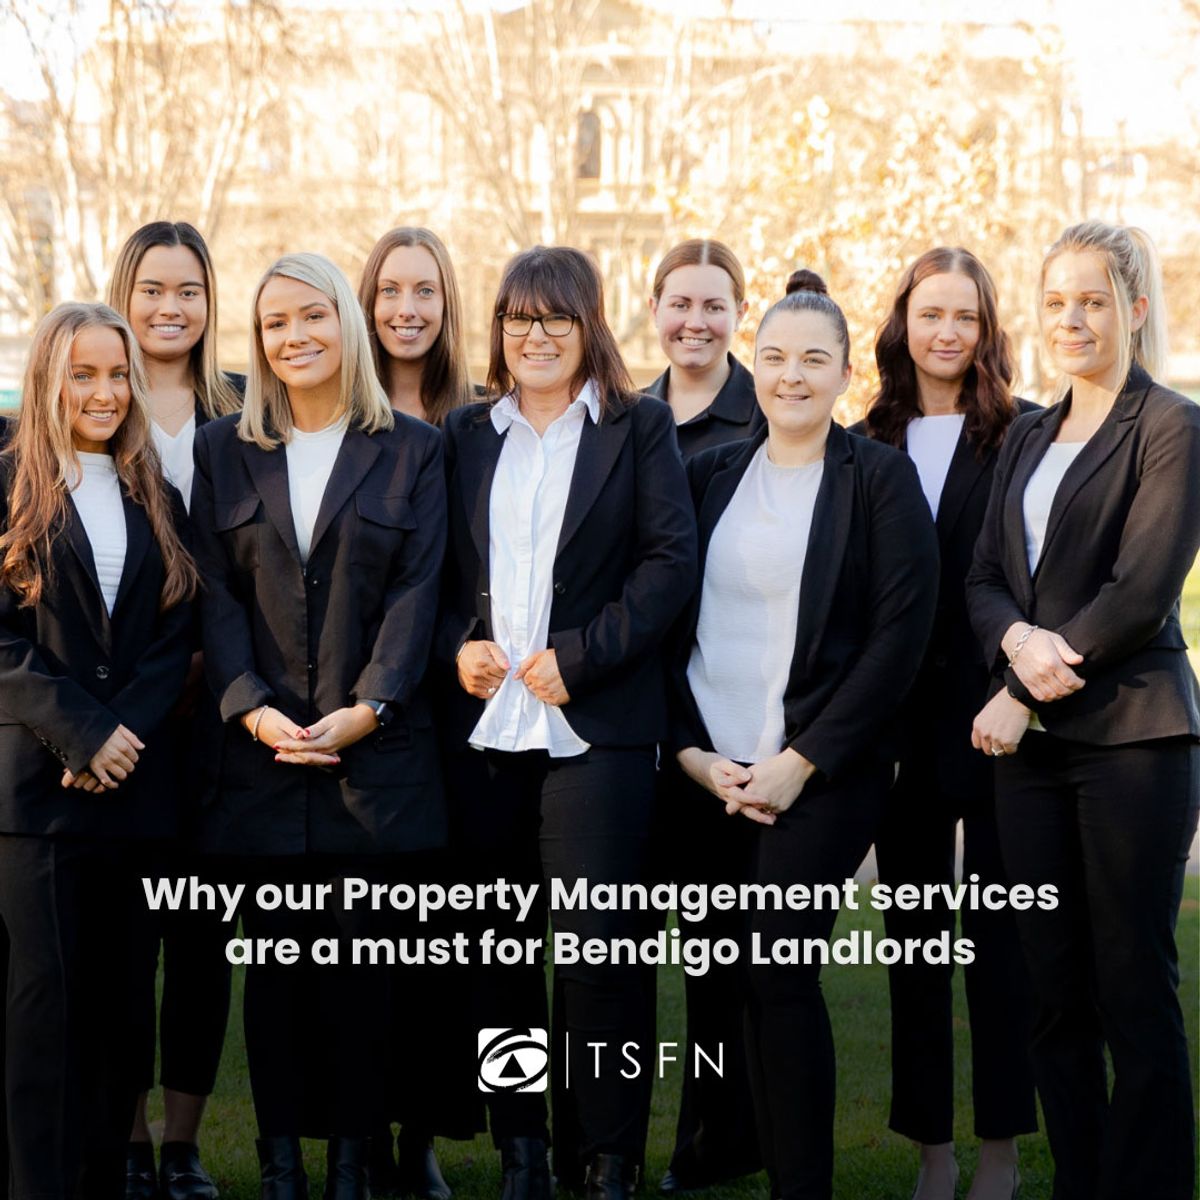 Unlock Peace of Mind: Why Our Property Management Services Are a Must for Bendigo Landlords